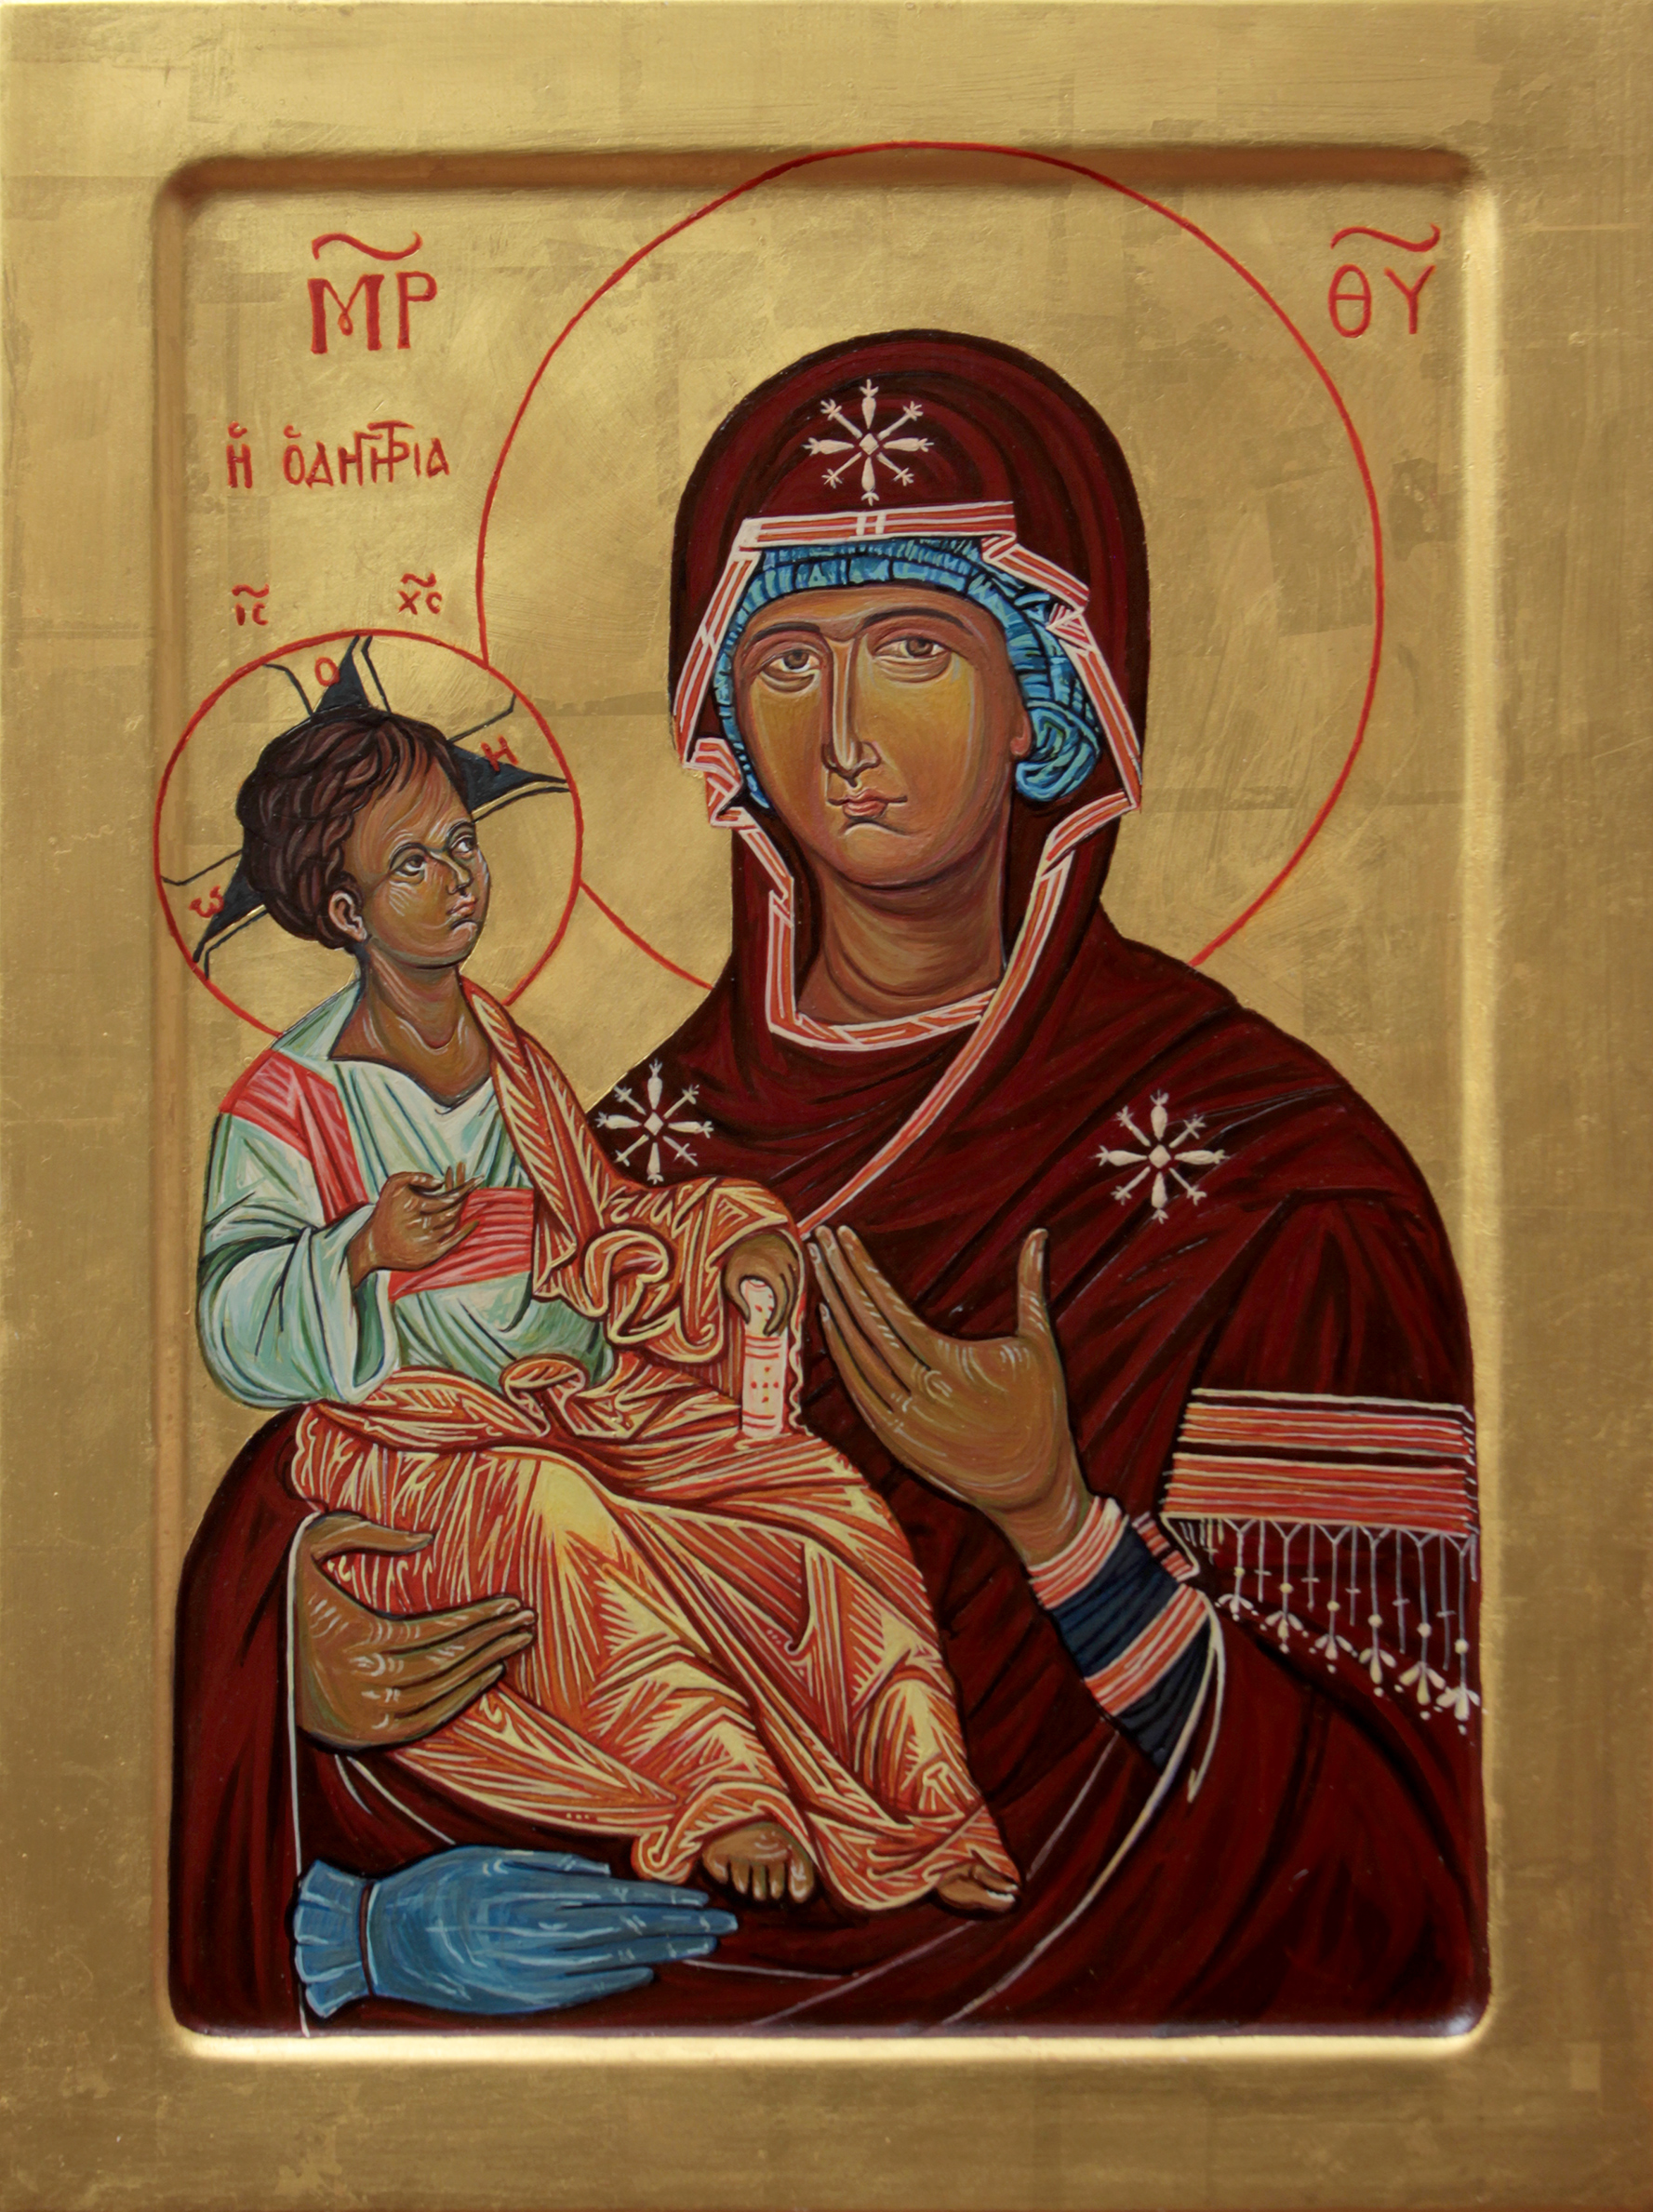 Virgin Mary - (Bogorodica Trojeručica) - 40x30cm Commissioned Byzantine Icon egg tempera on wood with gold leaf - Hand painted by artist Milica MARUŠIĆ